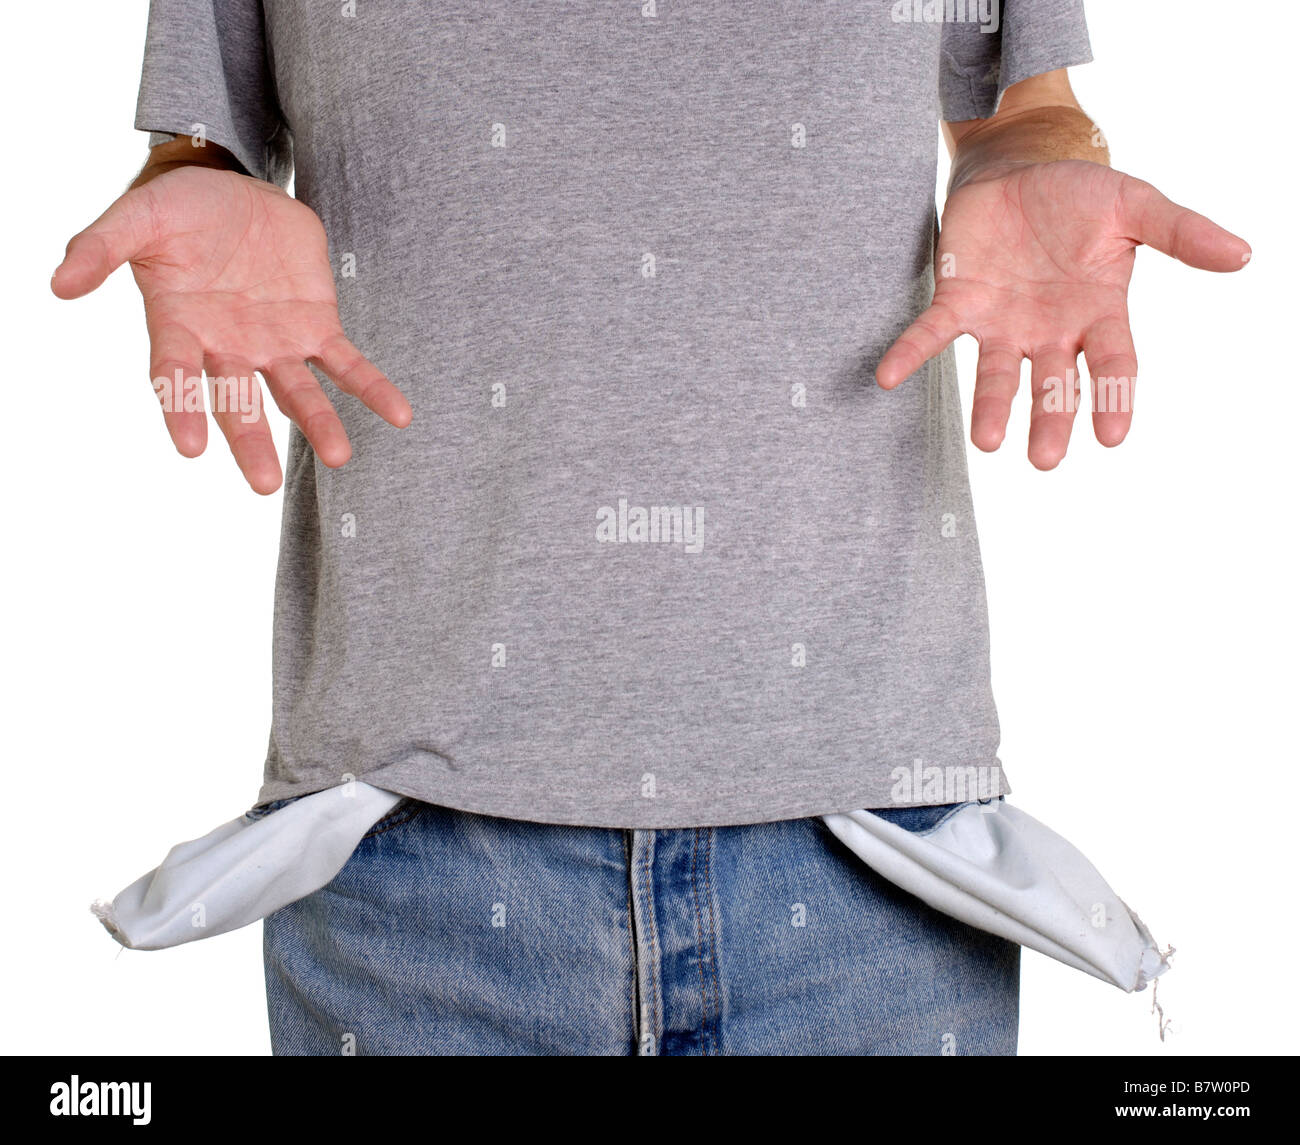 Conceptual shot of man with empty pockets showing he has no money Stock Photo